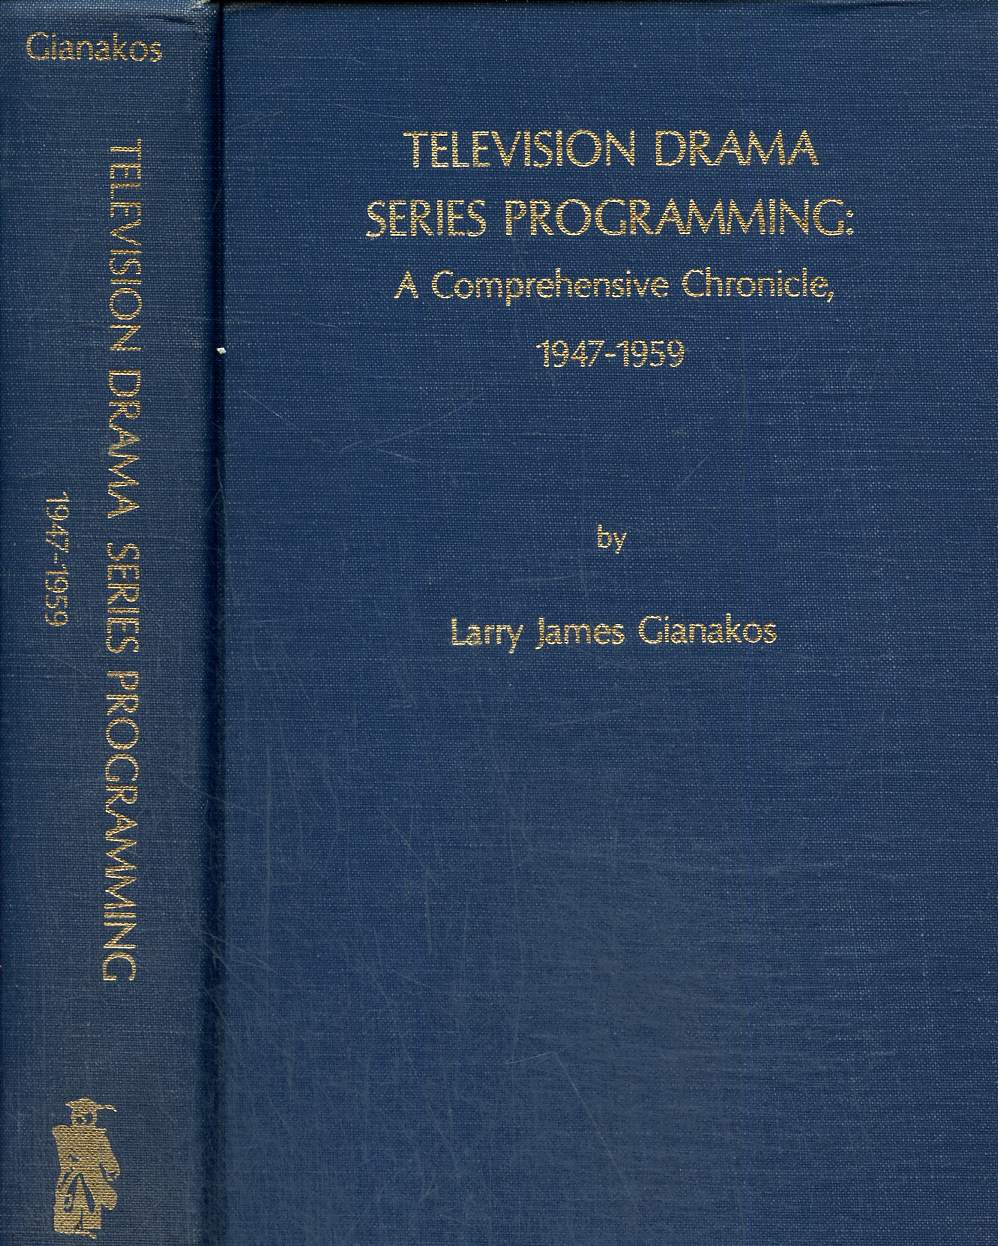 Television Drama Series Programming : A Comprehensive Chronicle, 1947-1959